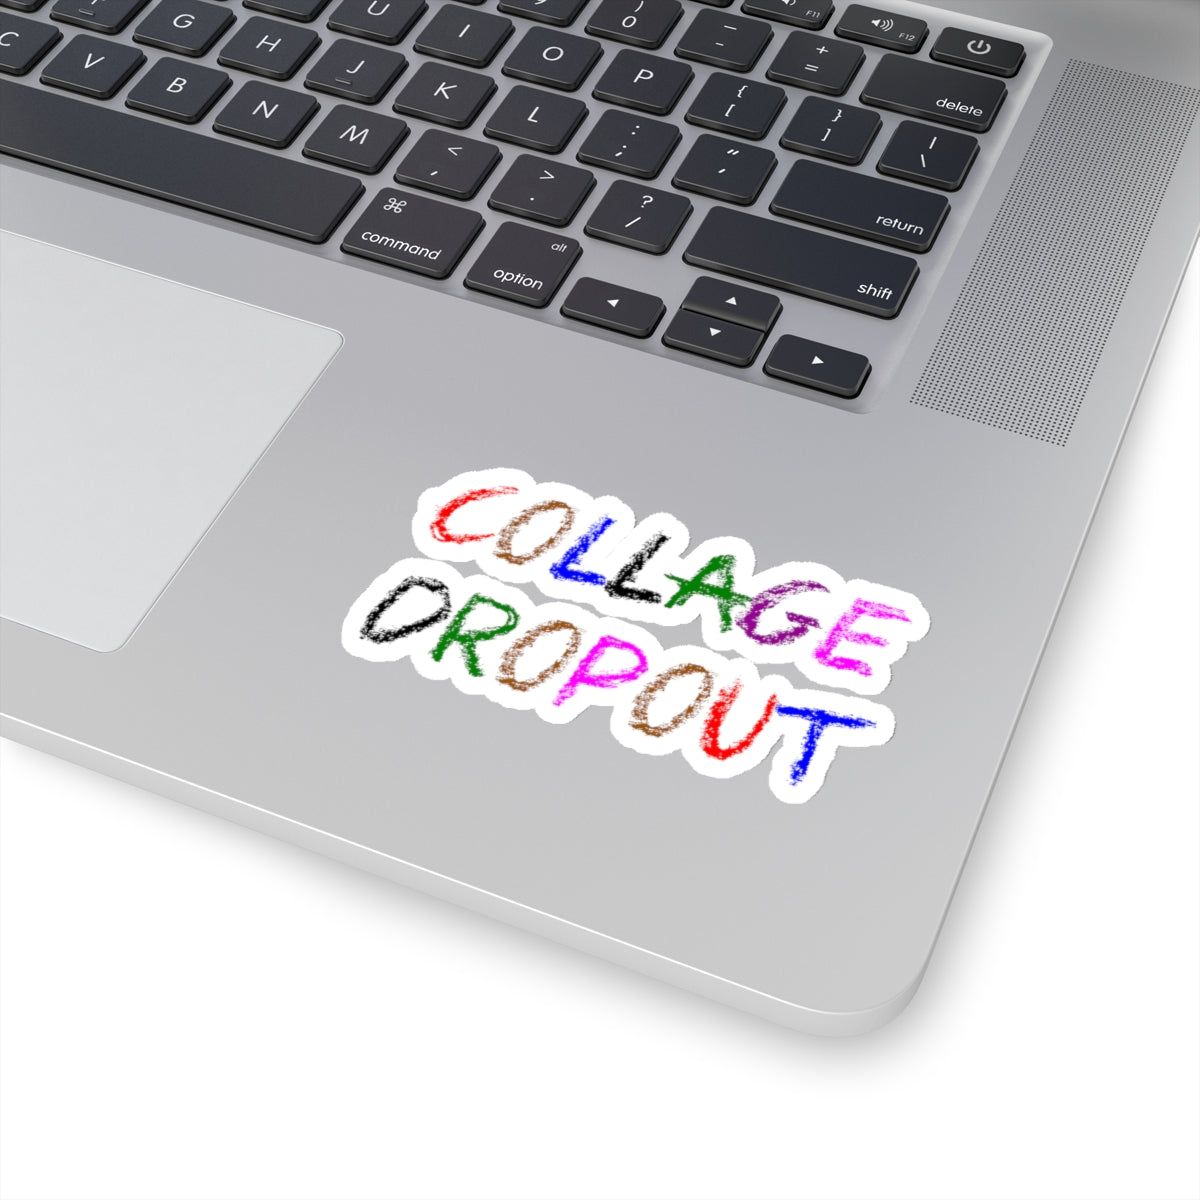 Collage Dropout - Kiss-Cut Stickers